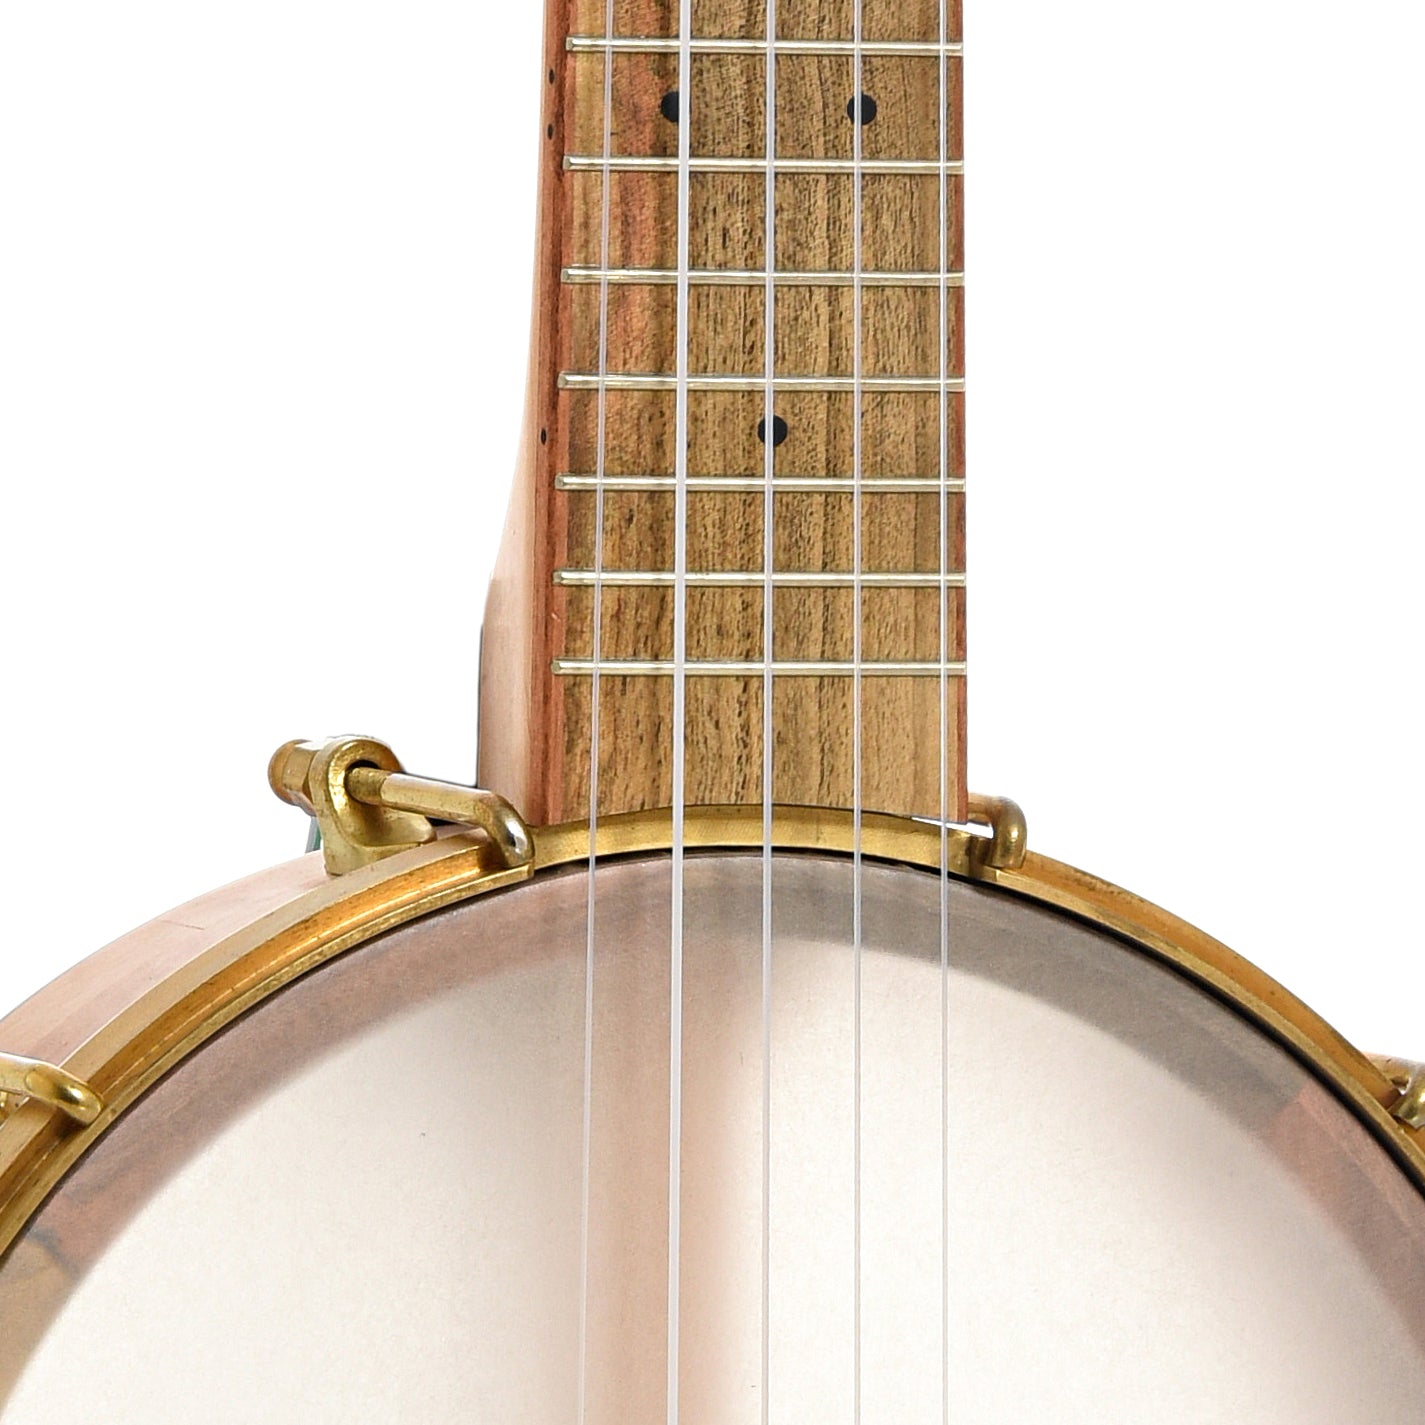 Front neck and body join of Aaron Keim Beansprout Mini 5-String Openback Banjo